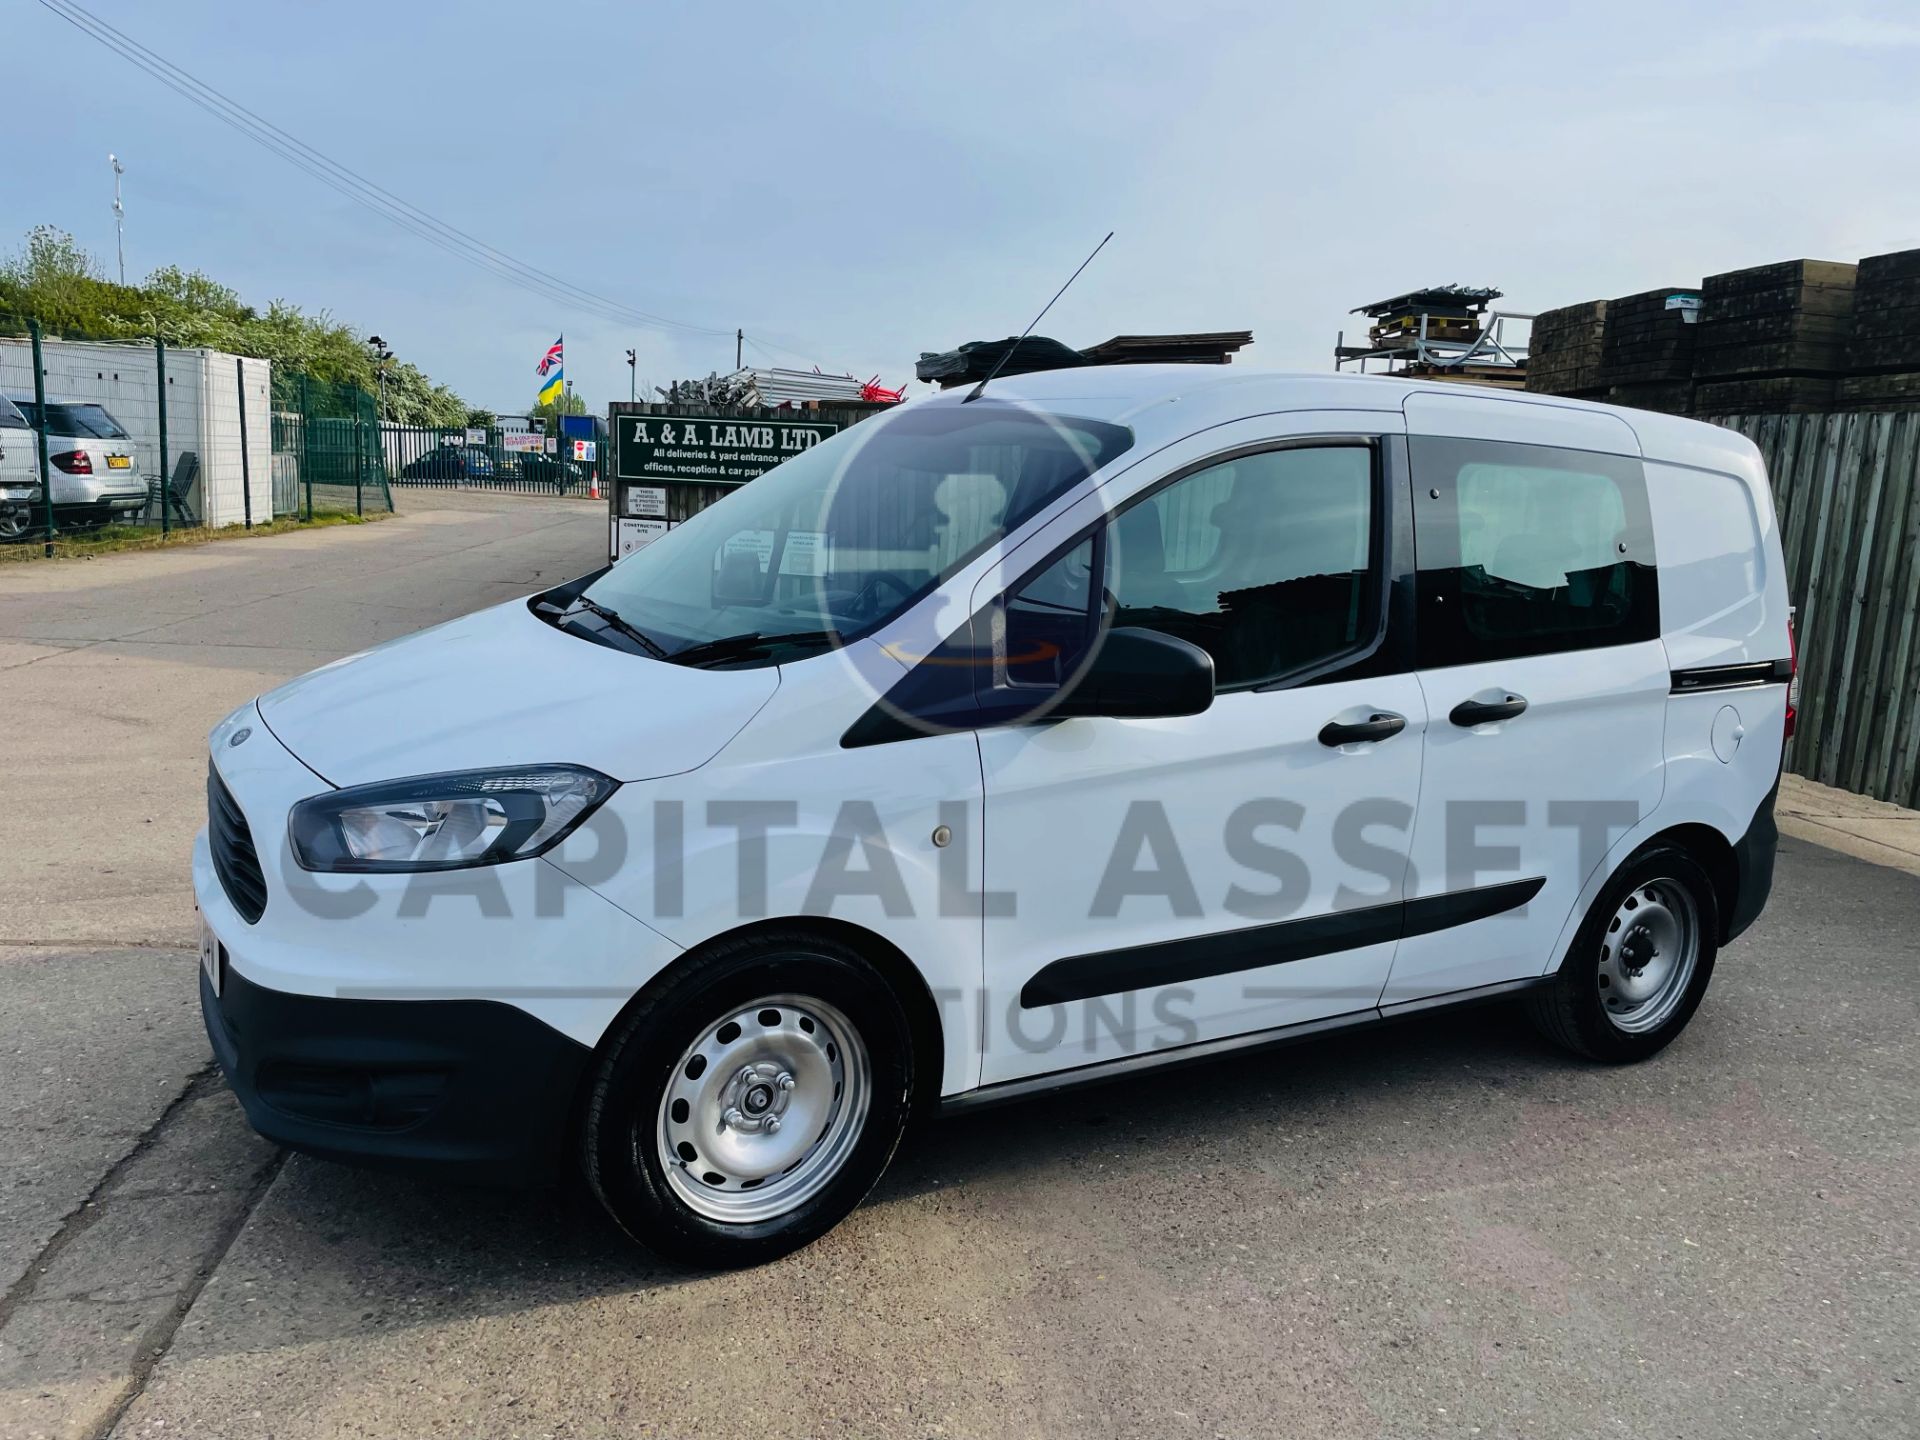 (ON SALE) FORD TRANSIT COURIER *5 SEATER CREW VAN* (2018-EURO 6) 1.5 TDCI -60 MPG+ (1 FORMER KEEPER) - Image 7 of 37